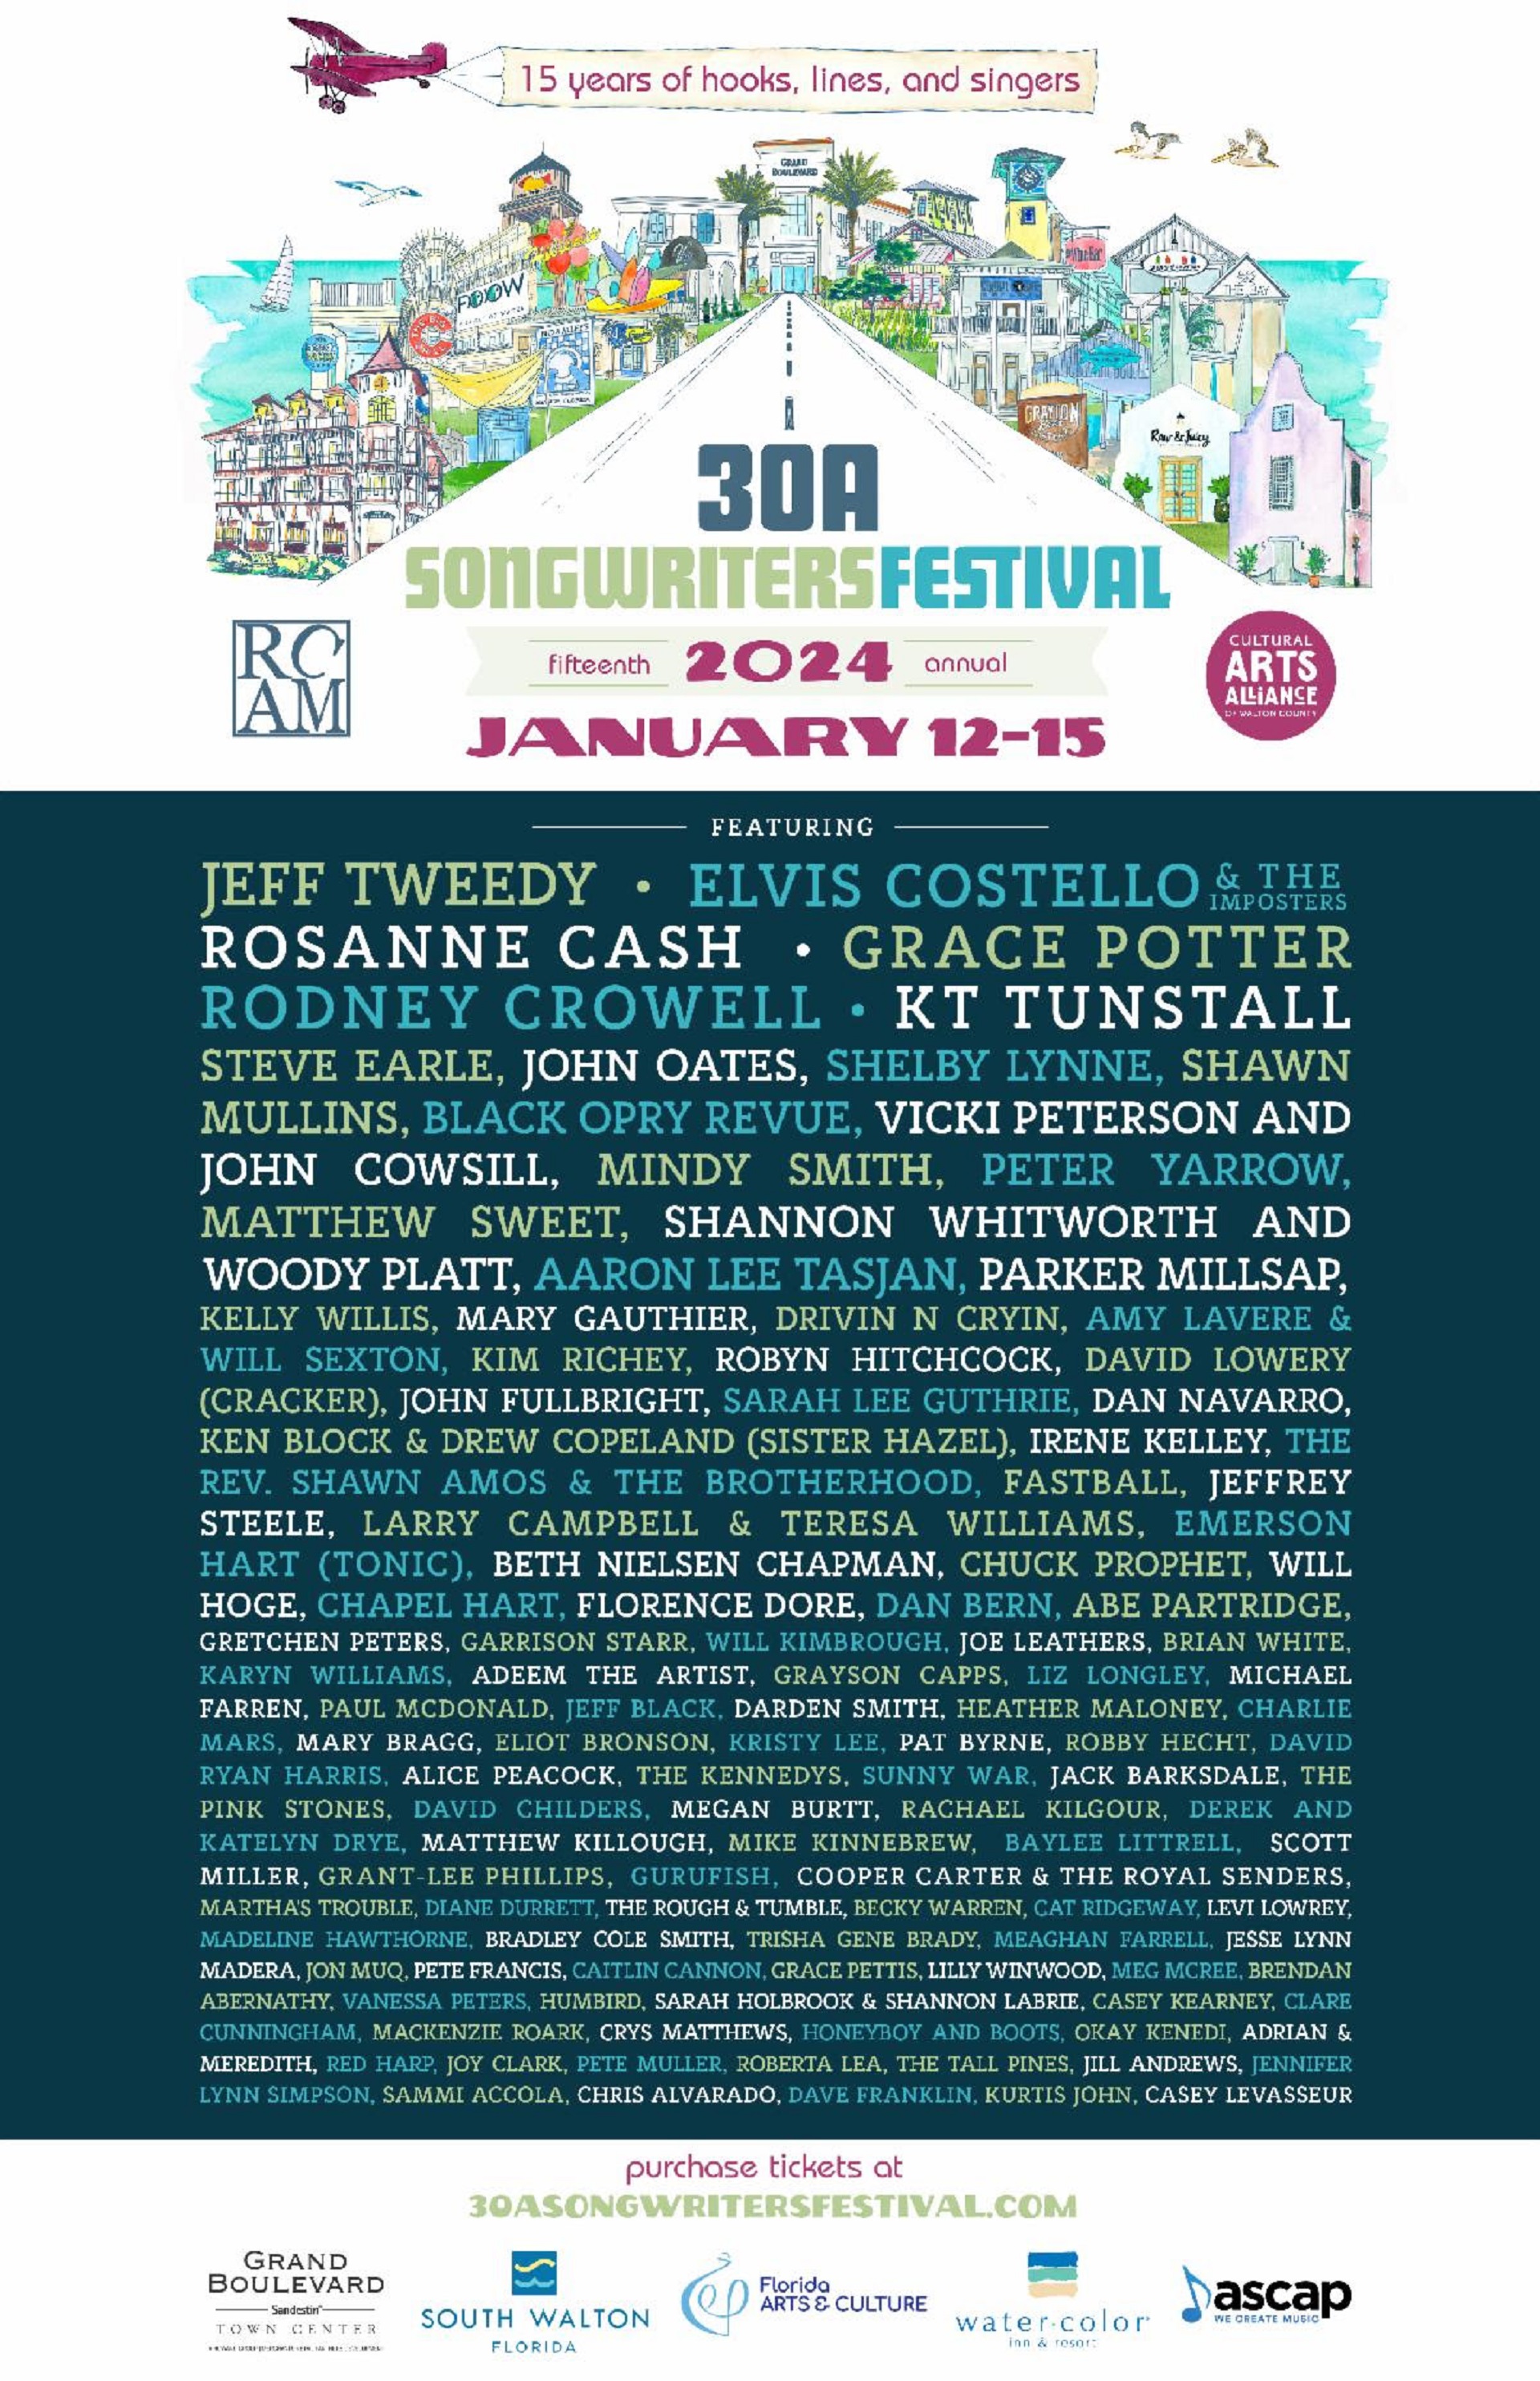 30A SONGWRITERS FESTIVAL Celebrates 15 Years With Headliners JEFF TWEEDY, ELVIS COSTELLO & THE IMPOSTERS, ROSANNE CASH, GRACE POTTER, RODNEY CROWELL and more